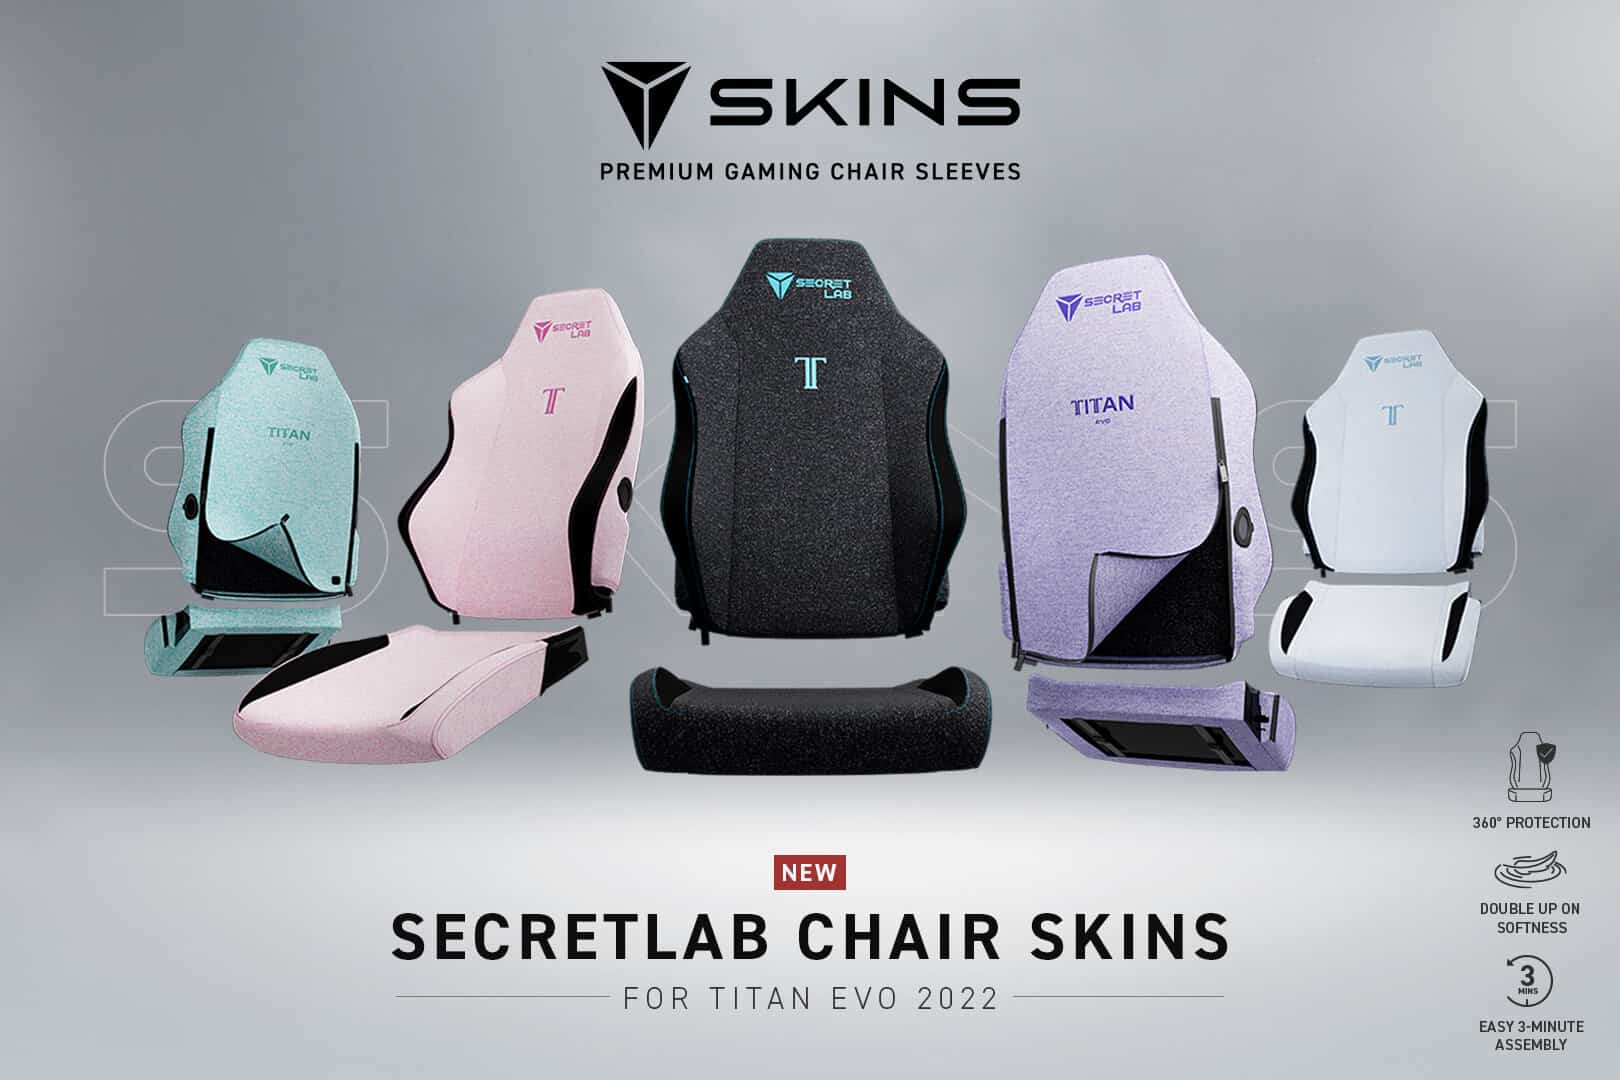 Secretlab SKINS allow you to customize your gaming chairs